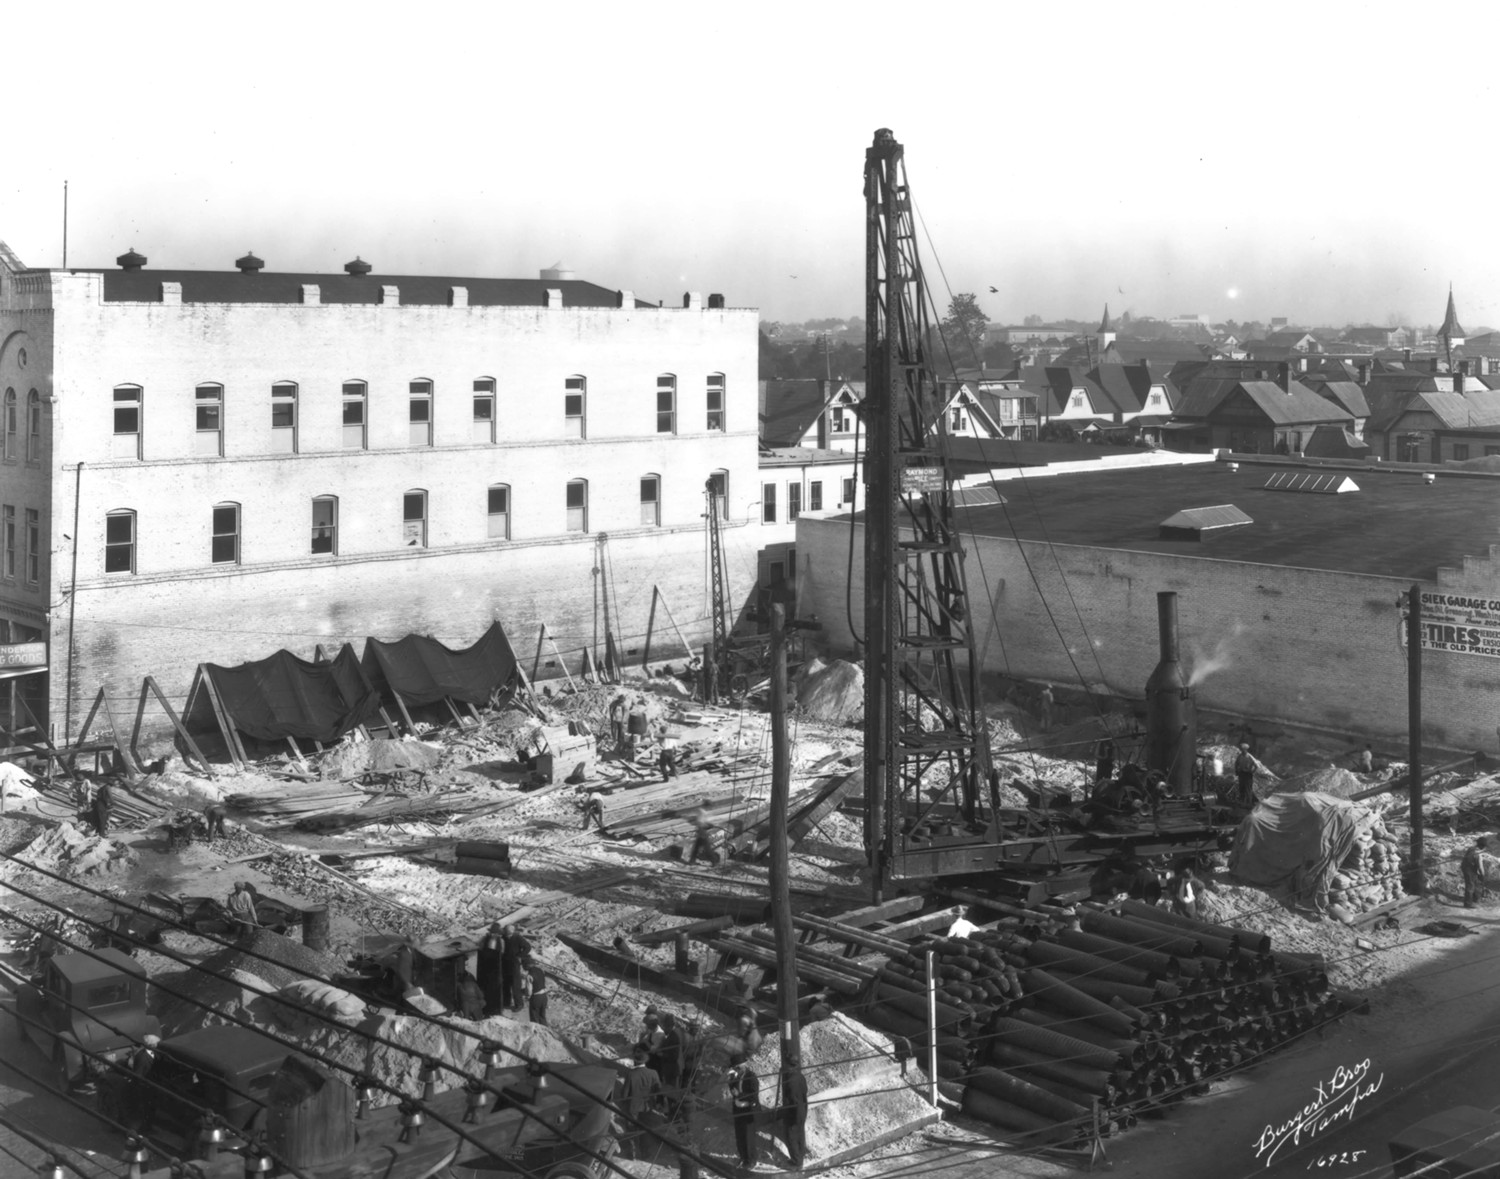 Floridan Hotel, Tampa Florida View of hotel under construction, showing the installation of foundation pilings looking northeast (1926)